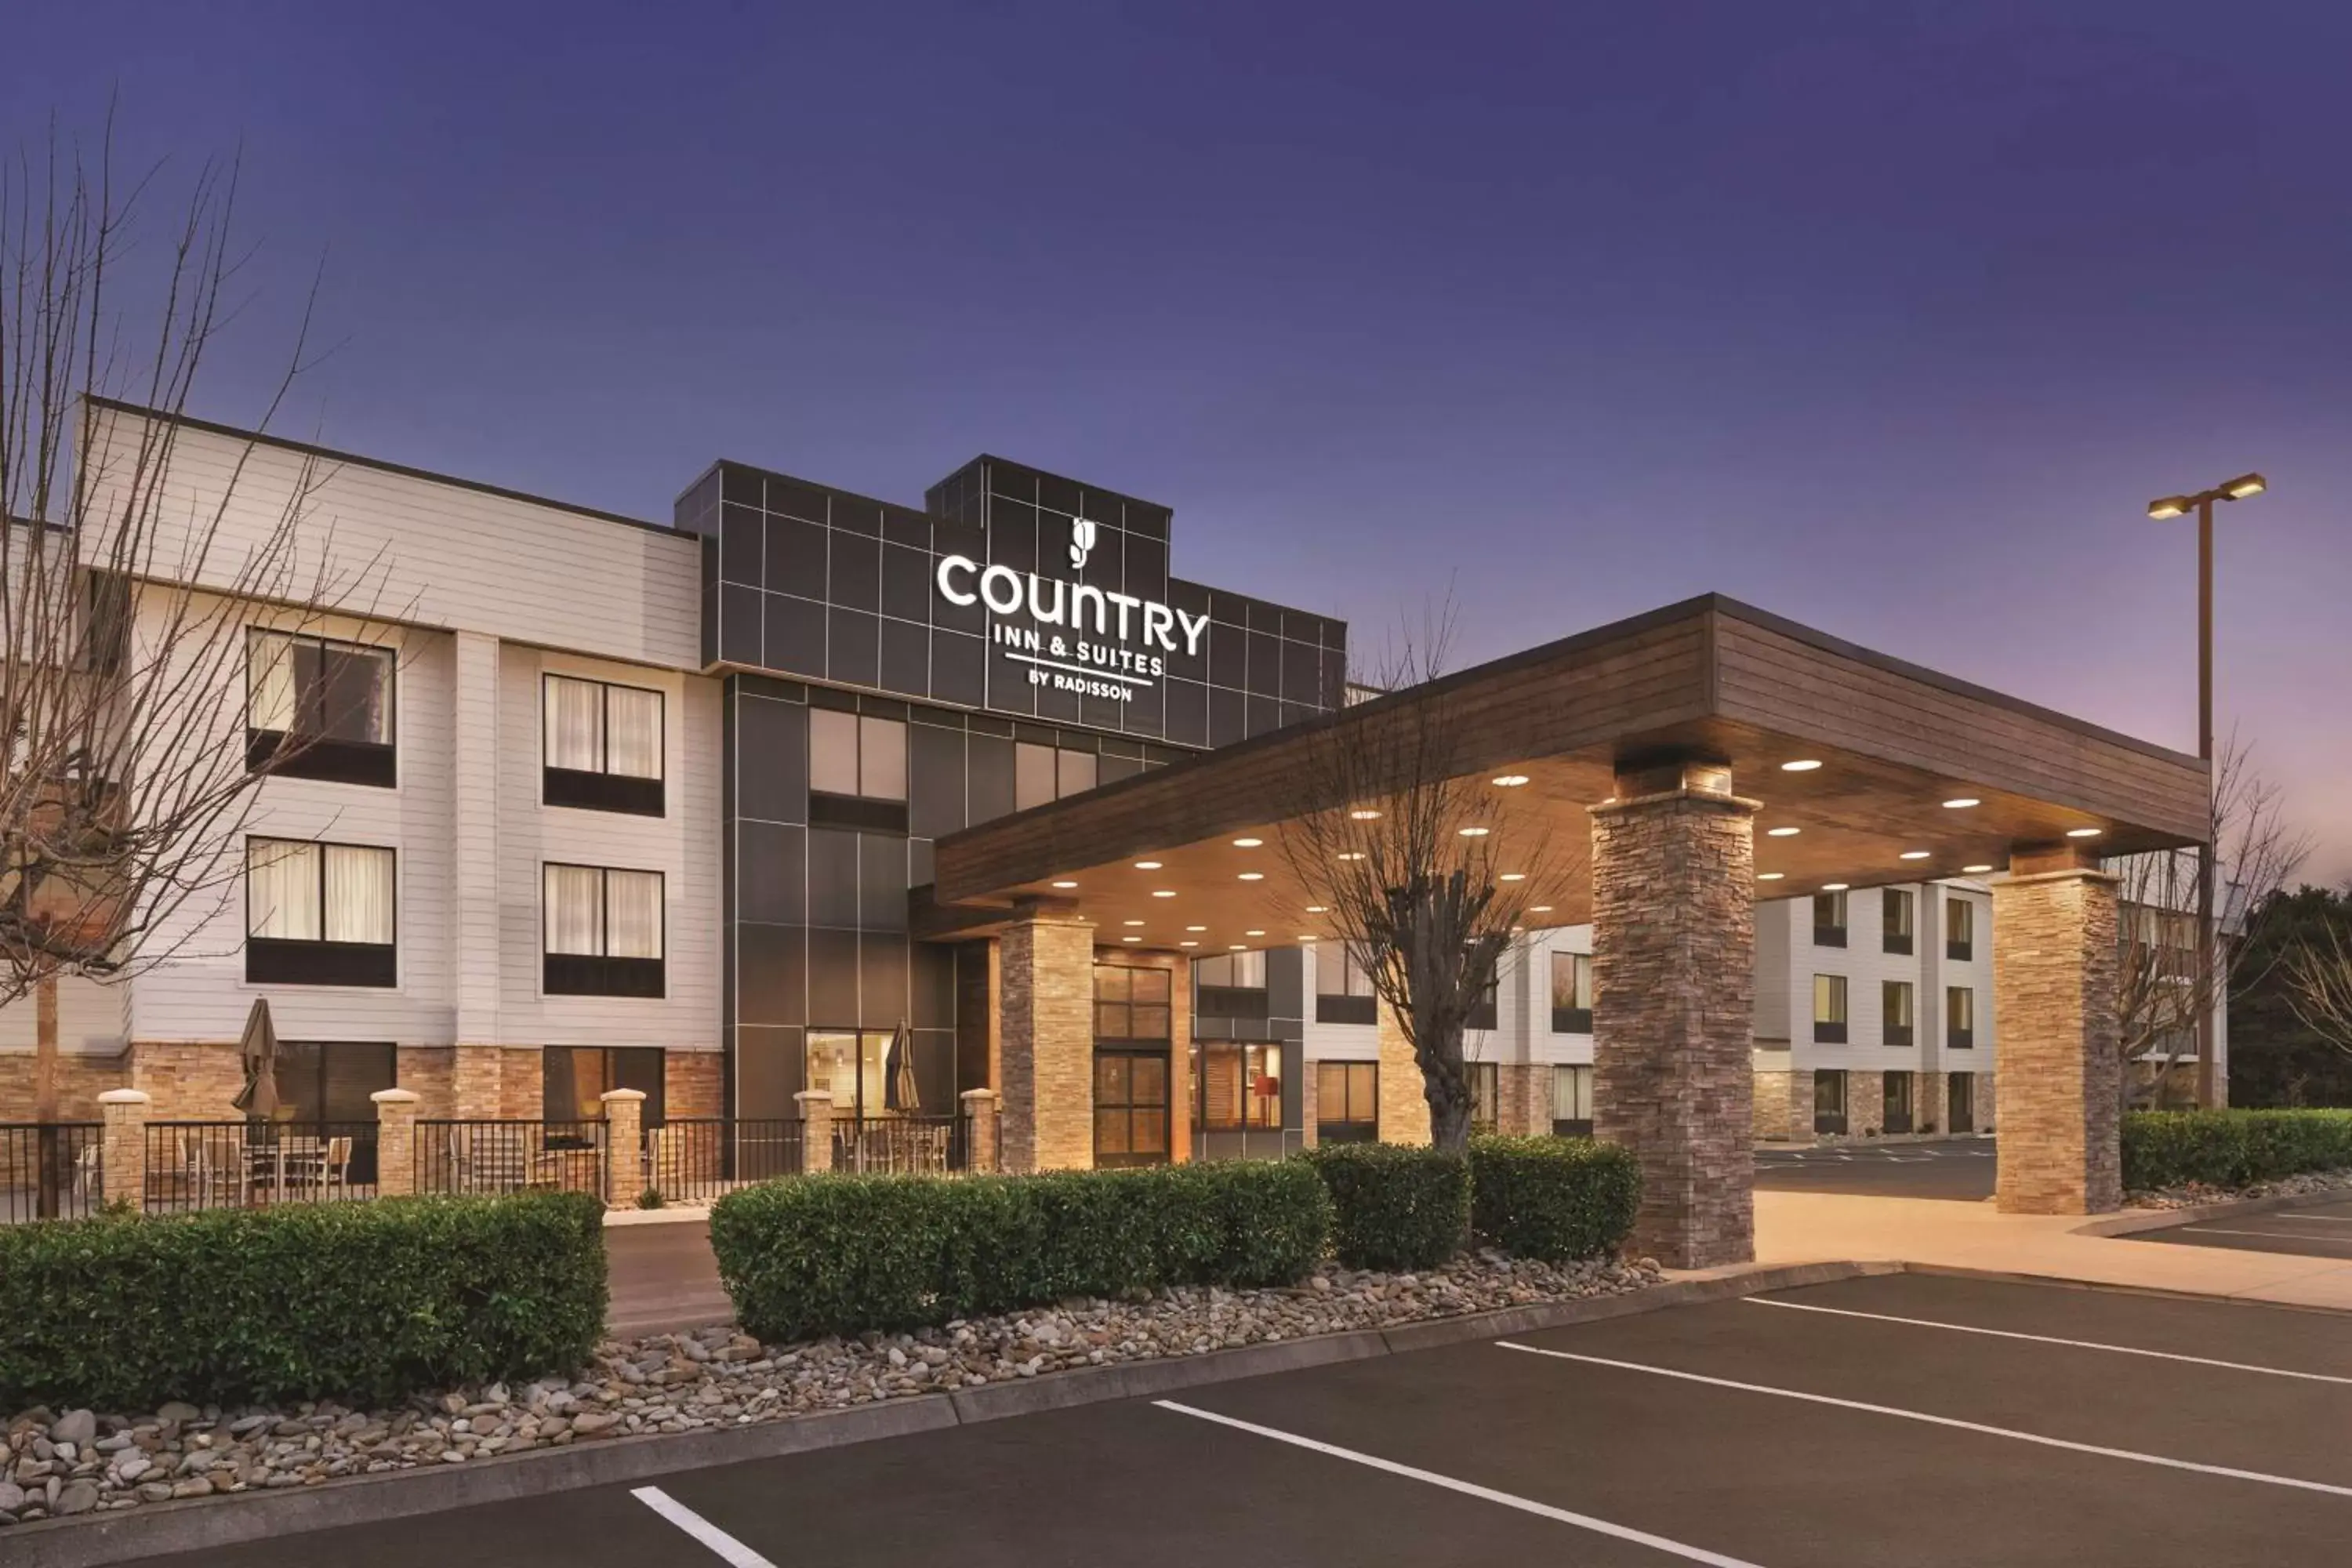 Property building in Country Inn & Suites by Radisson, Sevierville Kodak, TN